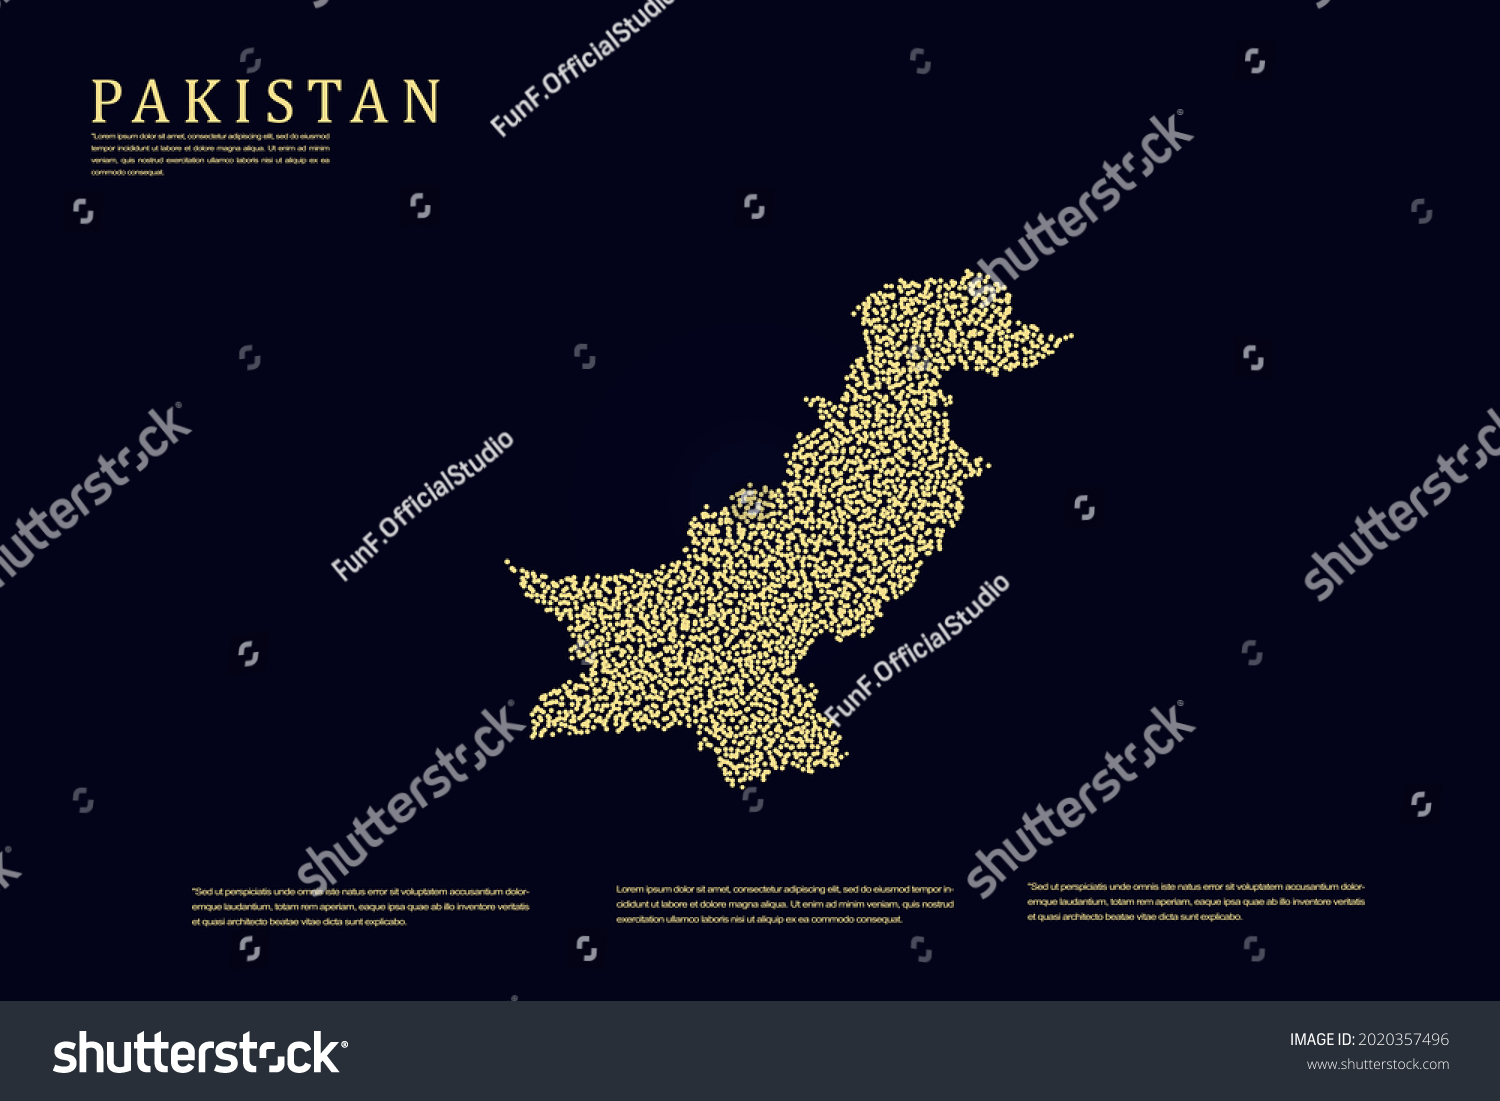 Stock Vector Pakistan Map World Map International Vector Template With Gold Grid On Dark Background For Banner 2020357496 